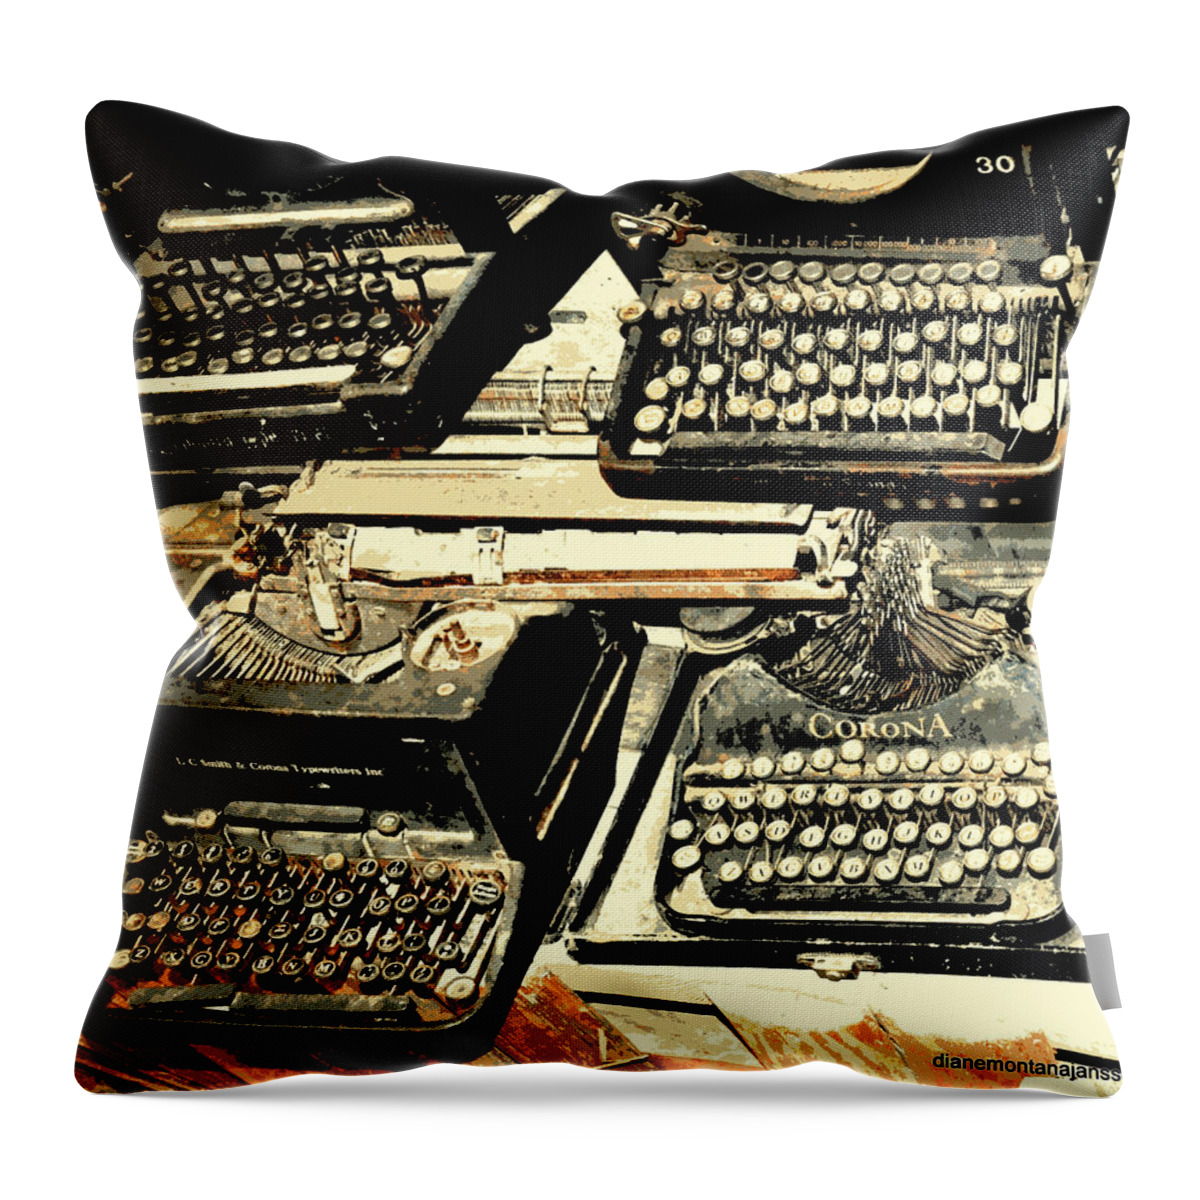 Typewriters Throw Pillow featuring the photograph Advanced Typing by Diane montana Jansson